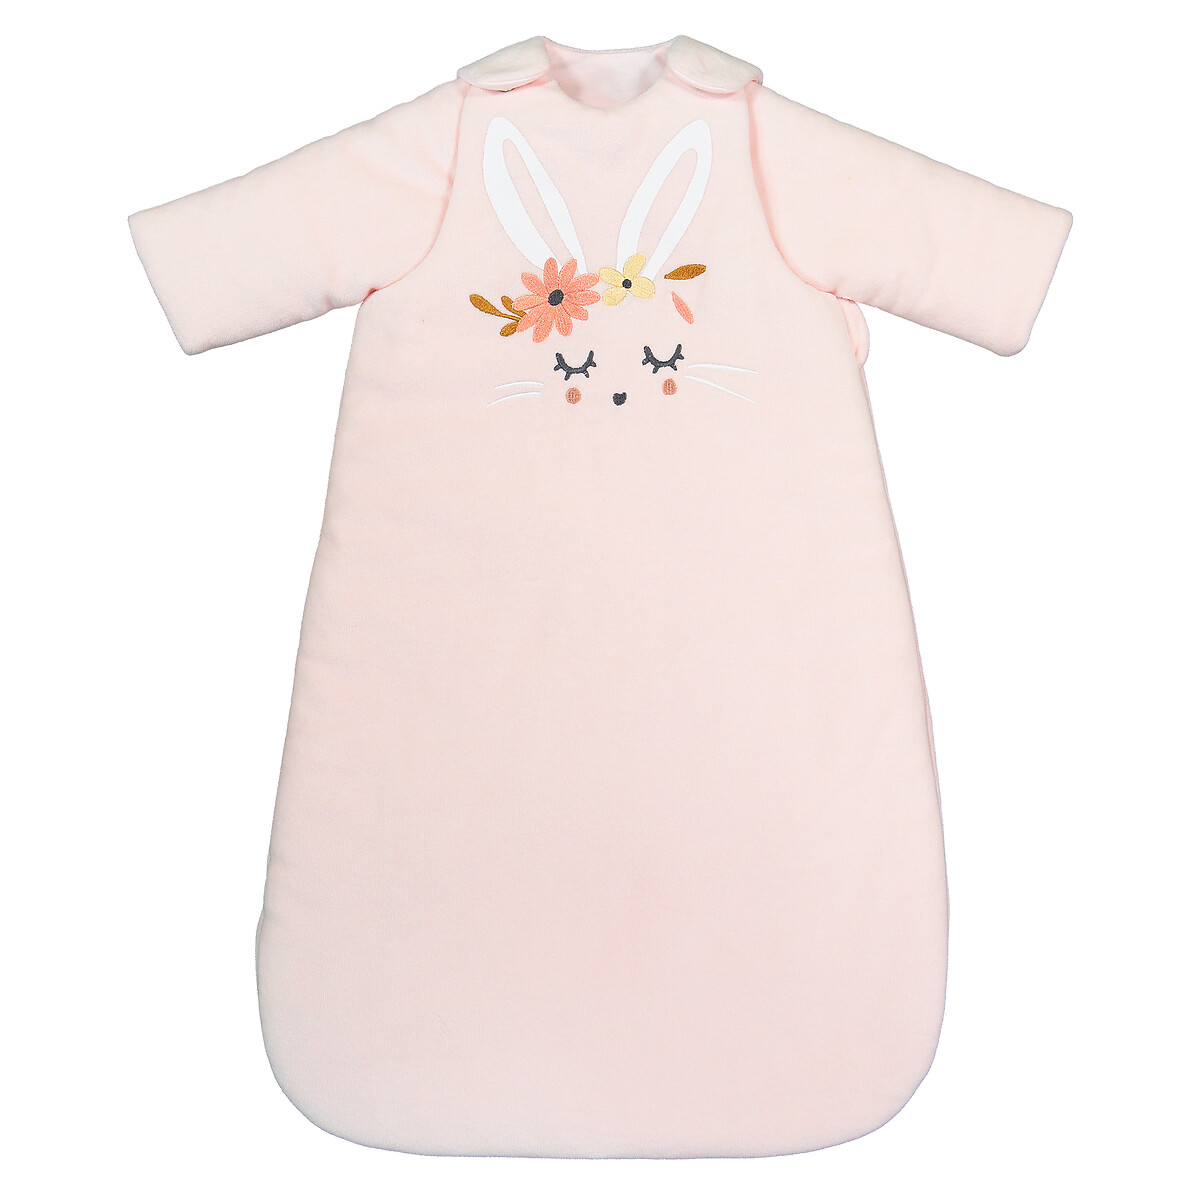 Gigoteuse dhiver BABY SWAN La Redoute Vêtements Sous-vêtements vêtements de nuit Gigoteuses 